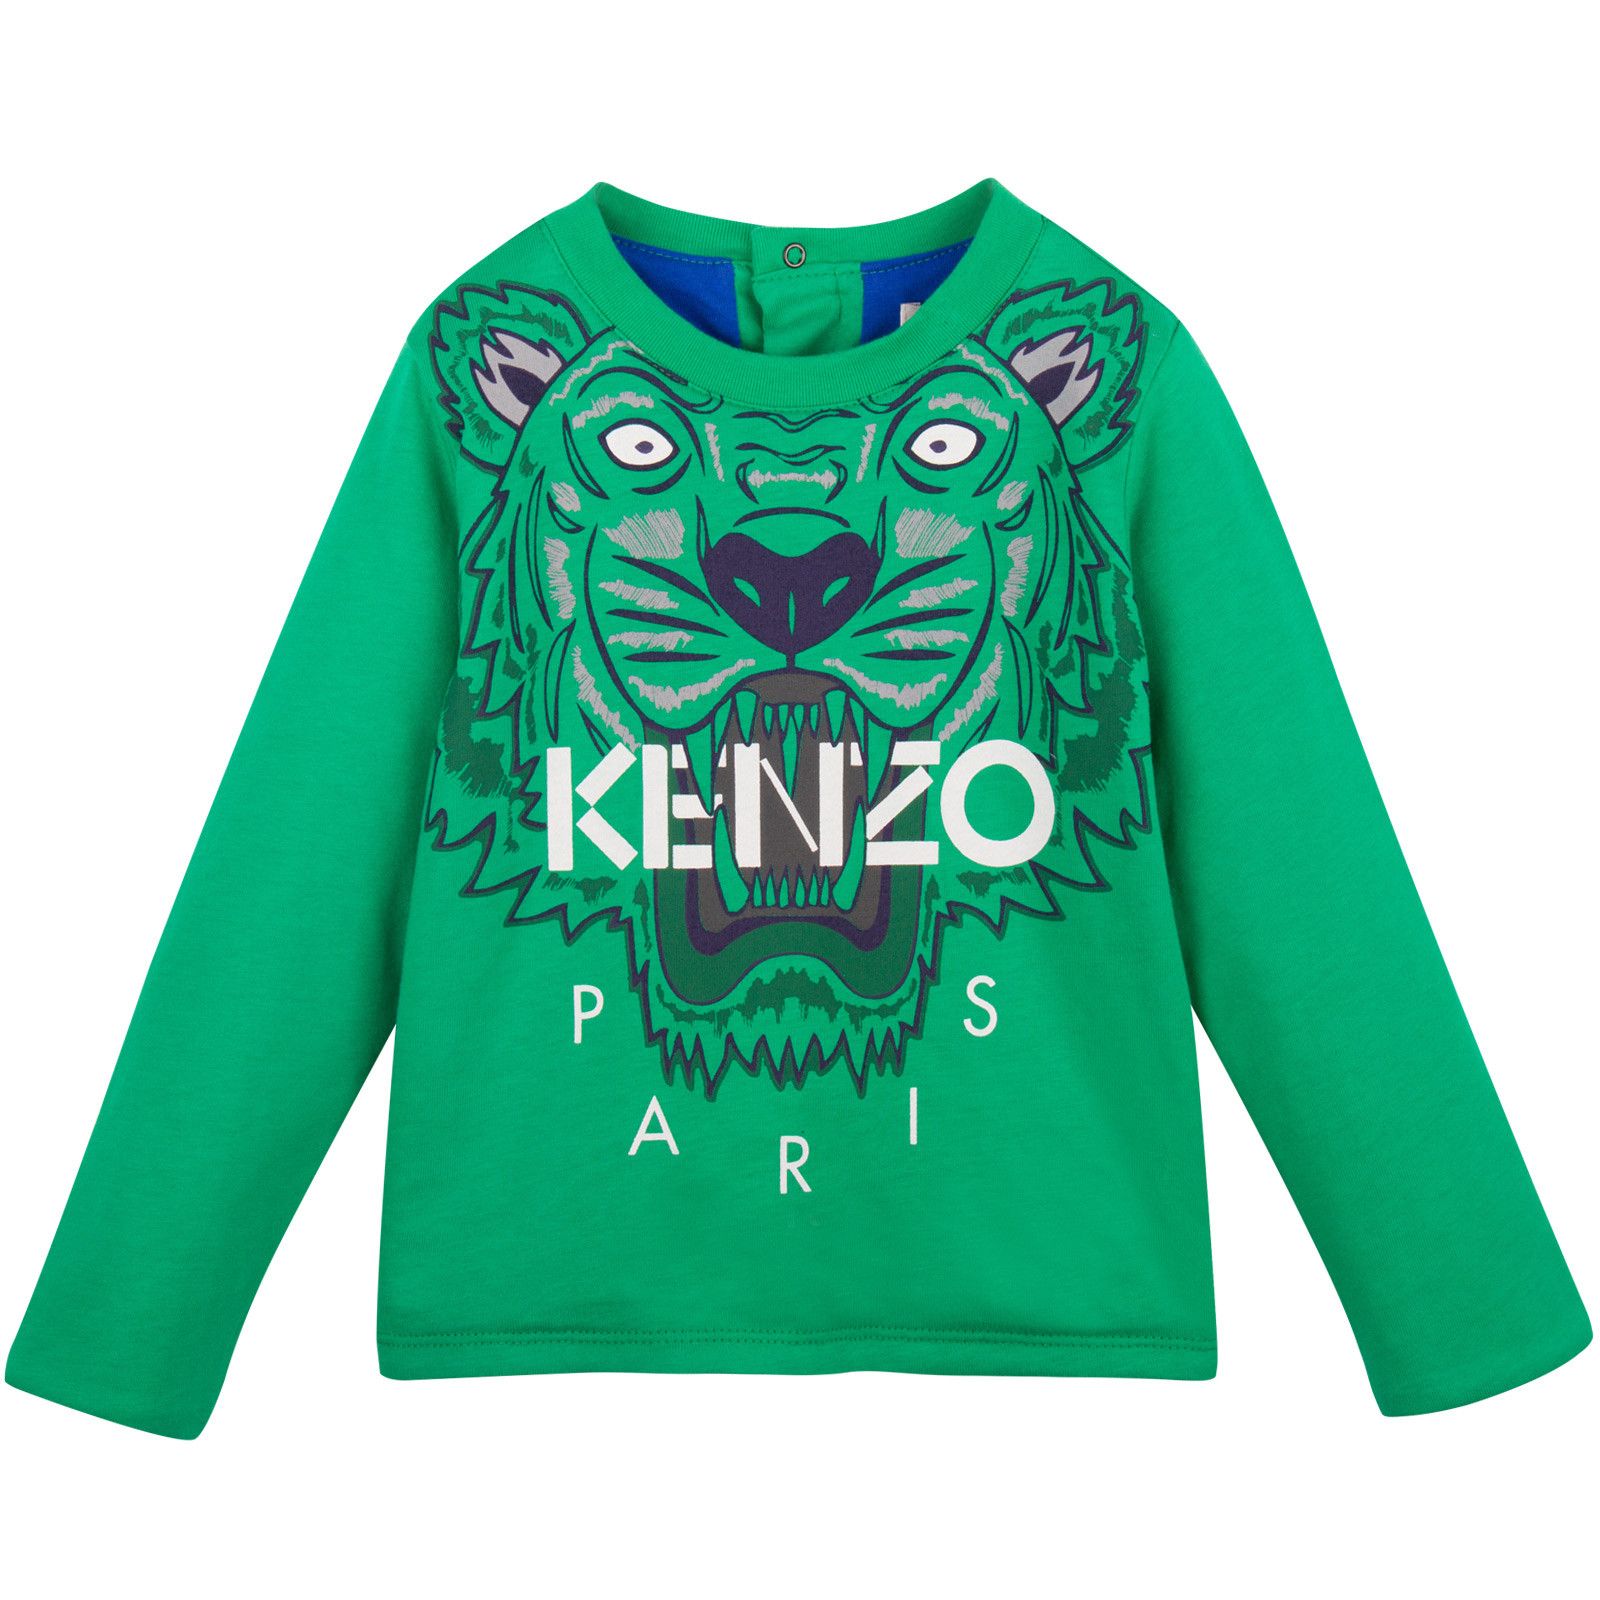 Baby Green Tiger Printed Sweatshirt With Blue Lining - CÉMAROSE | Children's Fashion Store - 1